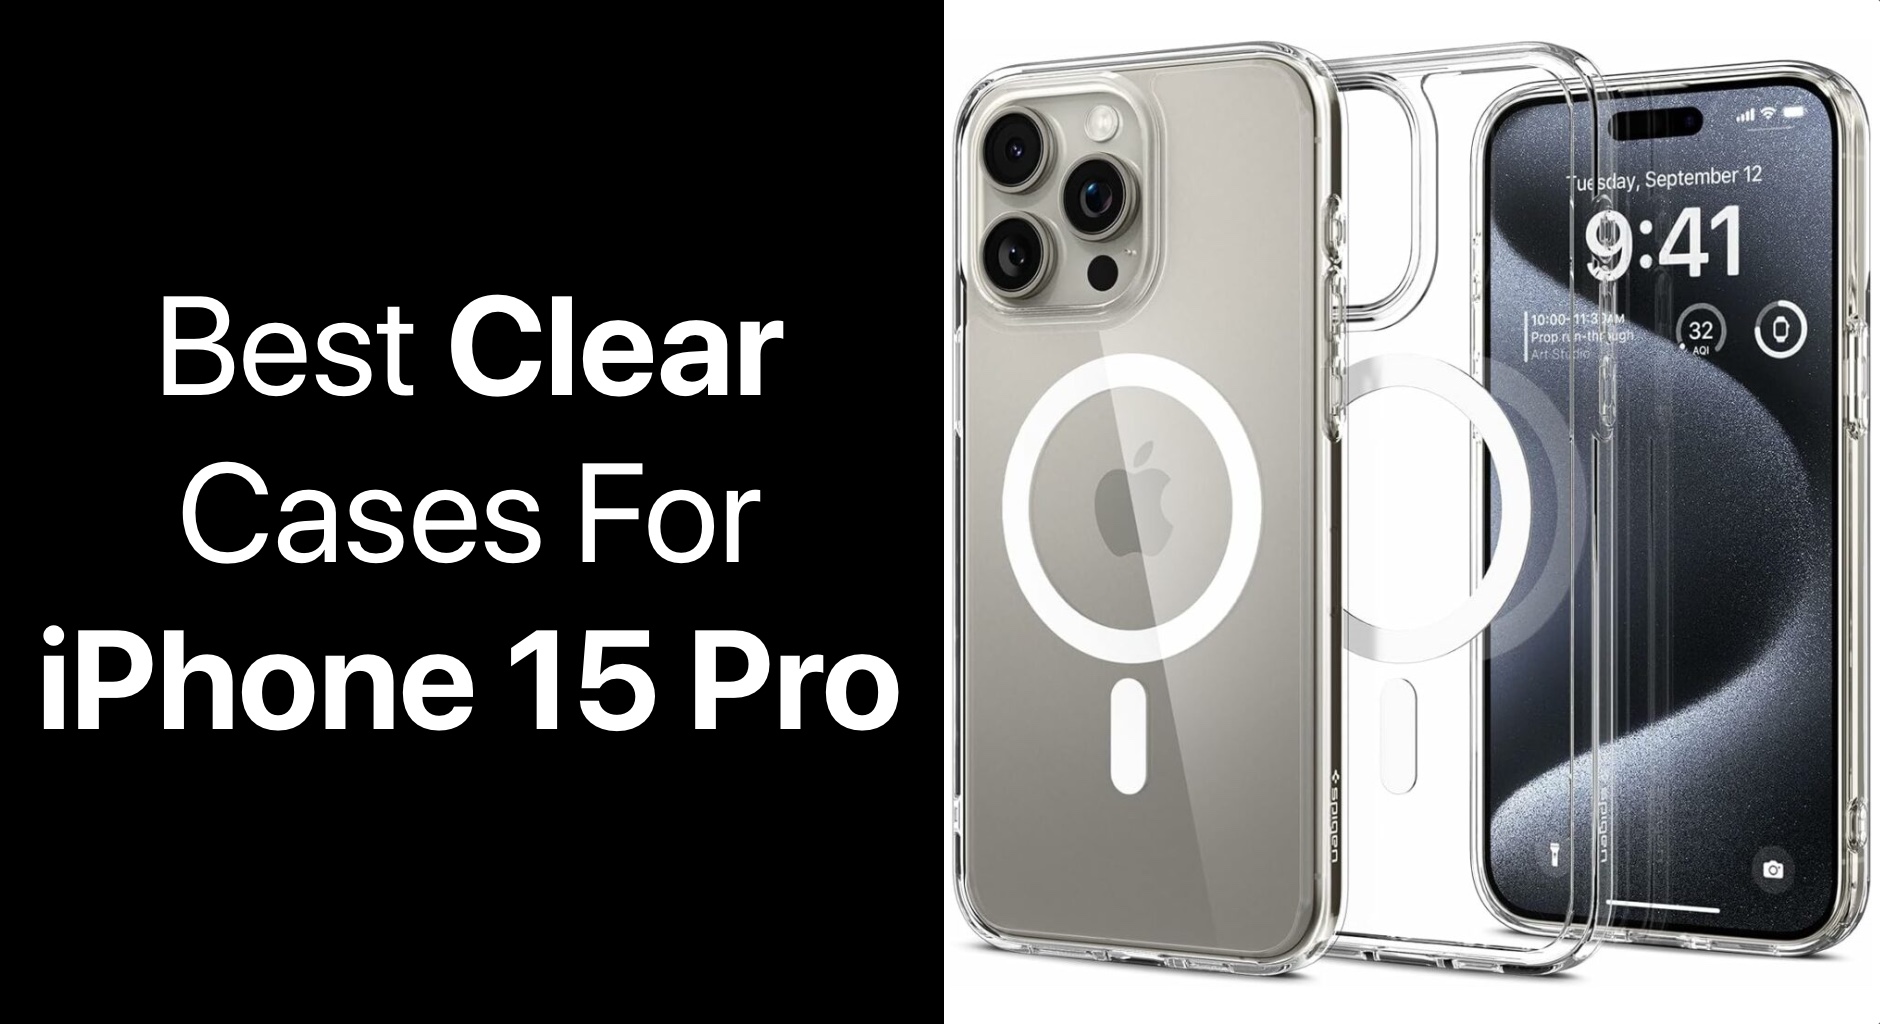 iPhone 15 Breaks Easily: Do I Need a Case for iPhone 15 Pro Max? - ESR Blog